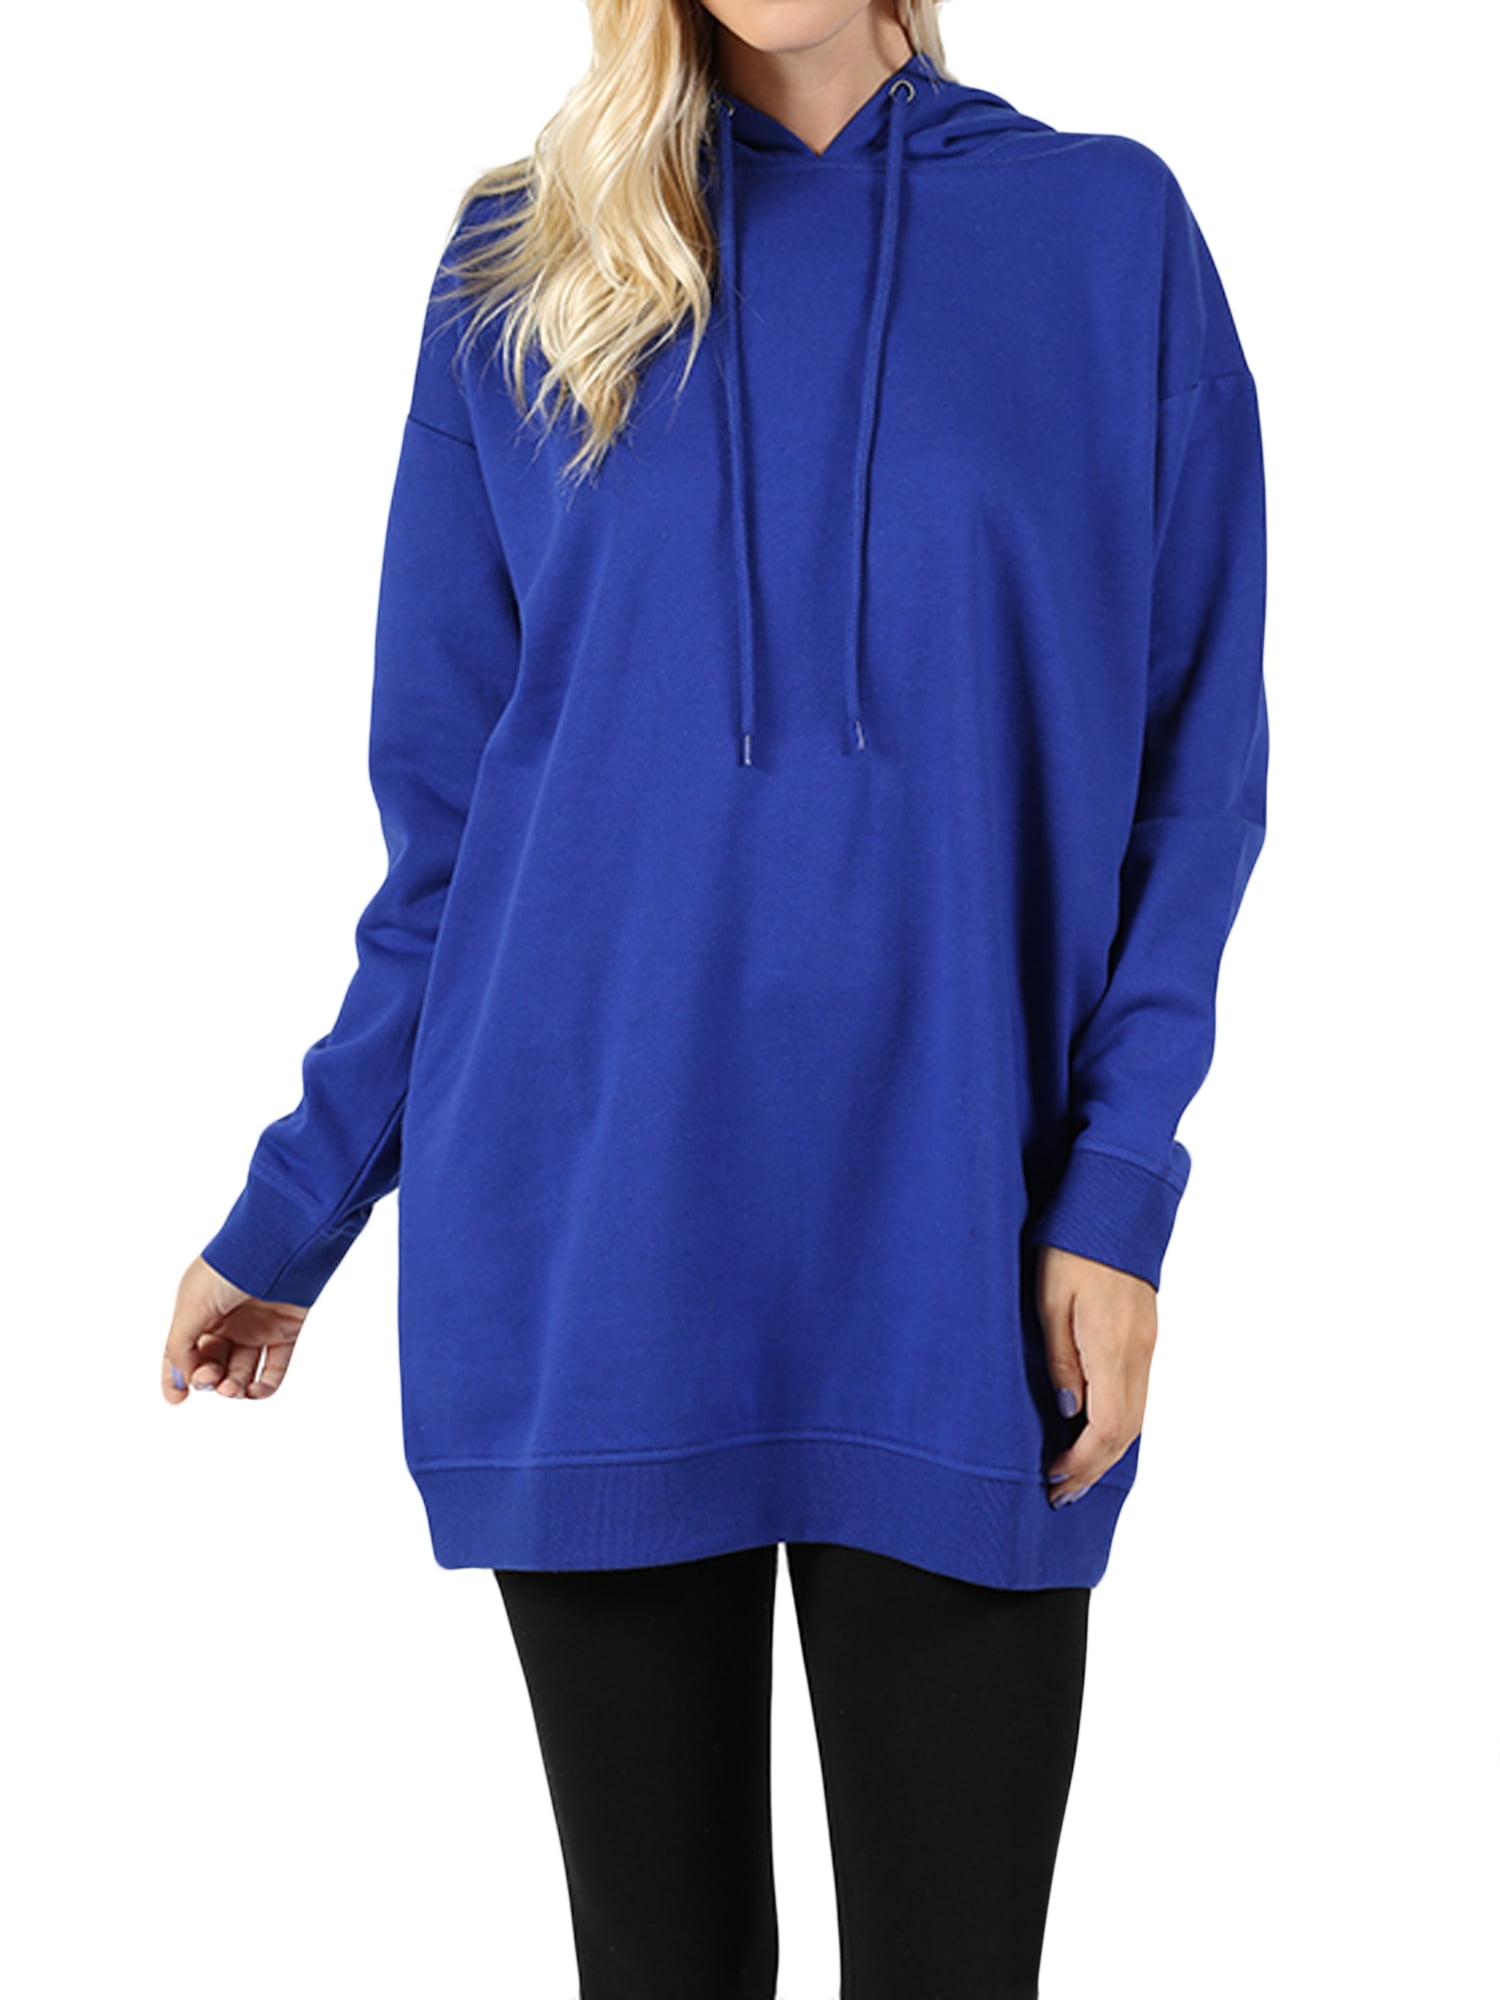 TheLovely - Women Oversized Loose Fit Hoodie Tunic Sweatshirts Top ...